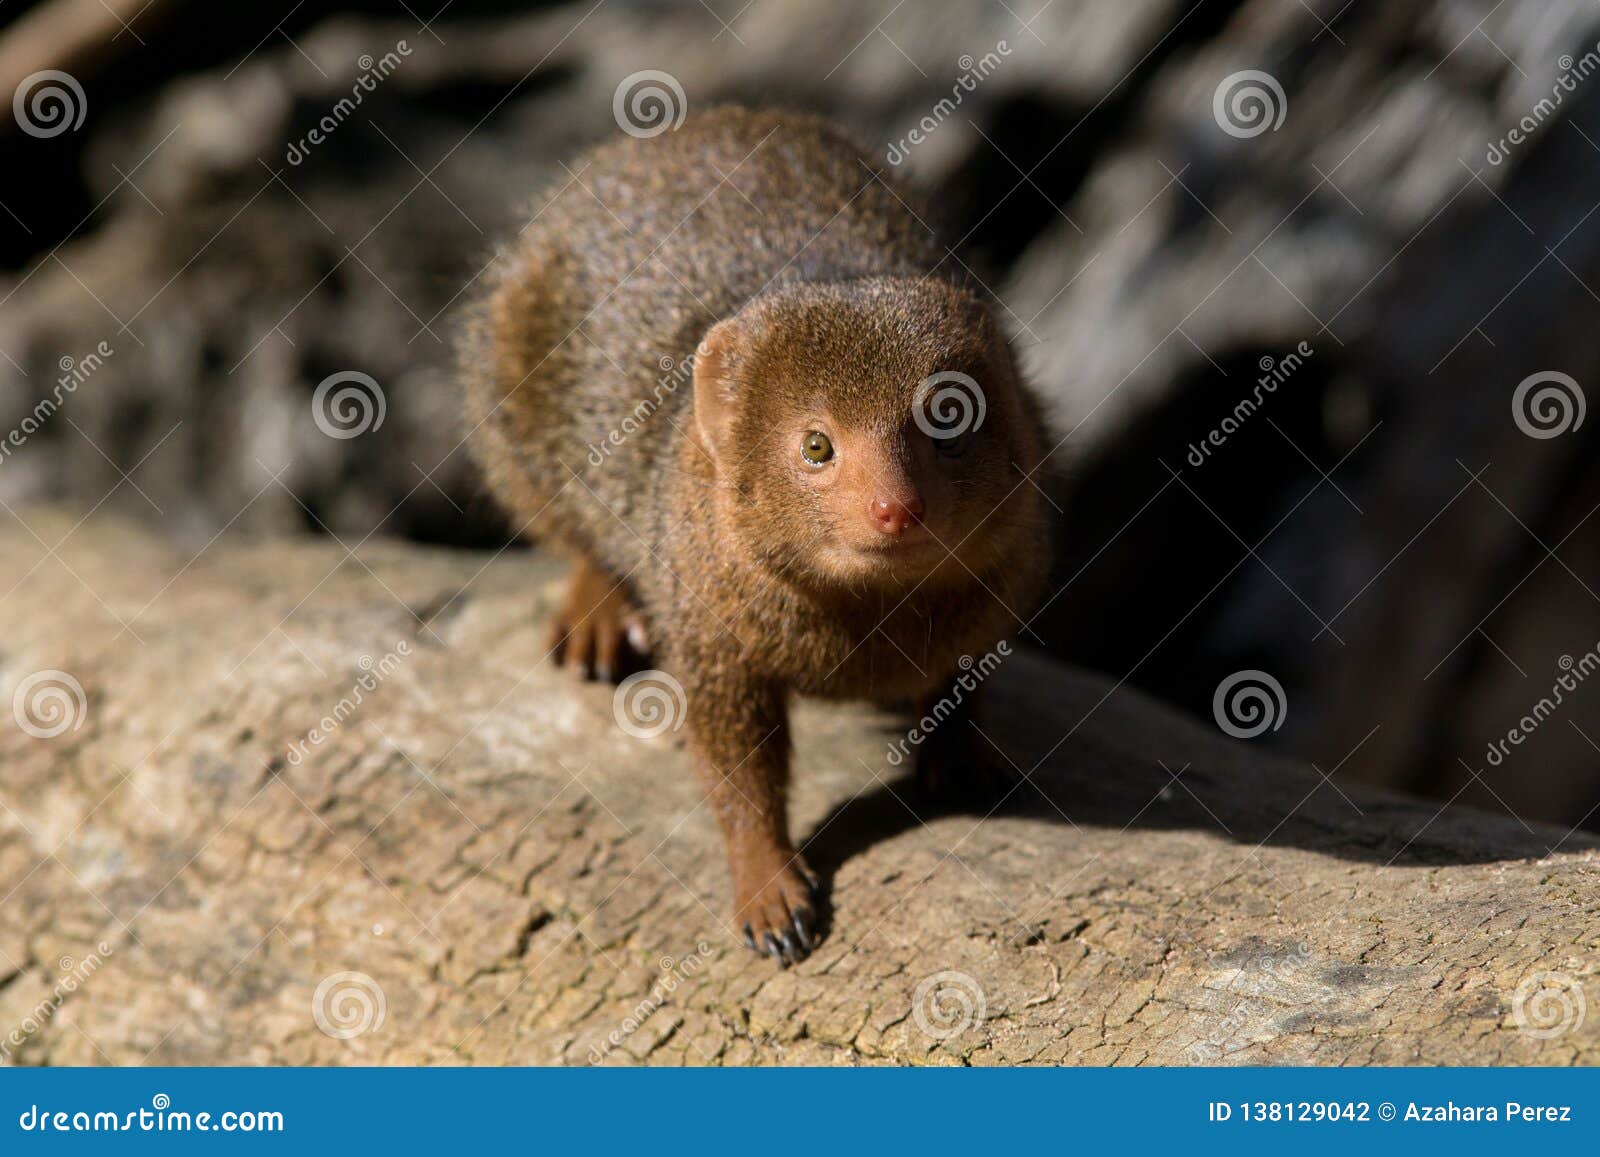 Download Cute Dwarf Mongoose In Africa Stock Photo - Image of ...